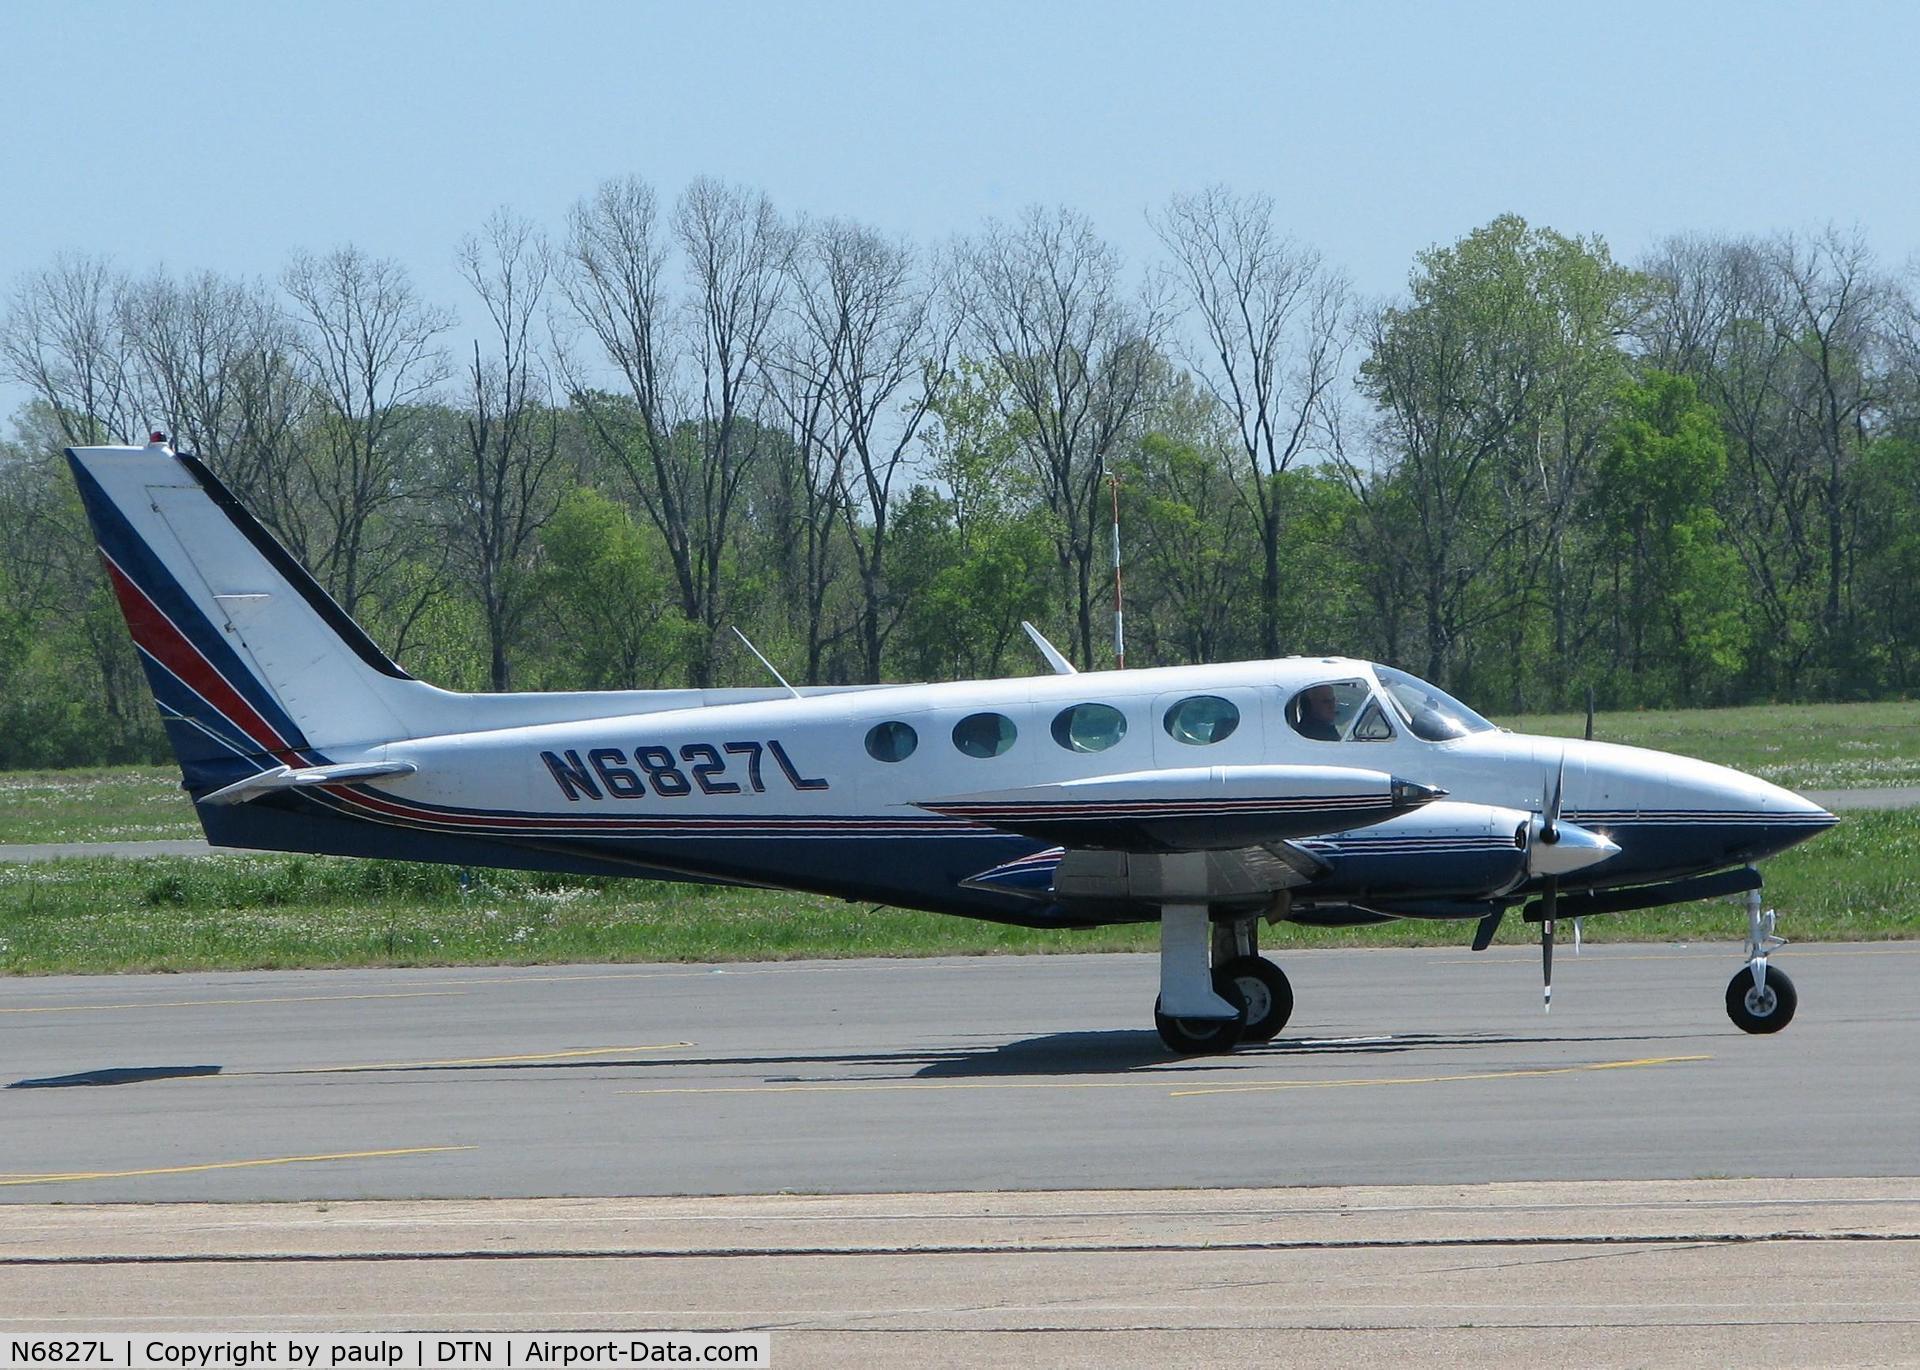 N6827L, Cessna 340A C/N 340A1219, Taxiing to park after landing at the Shreveport Downtown airport.